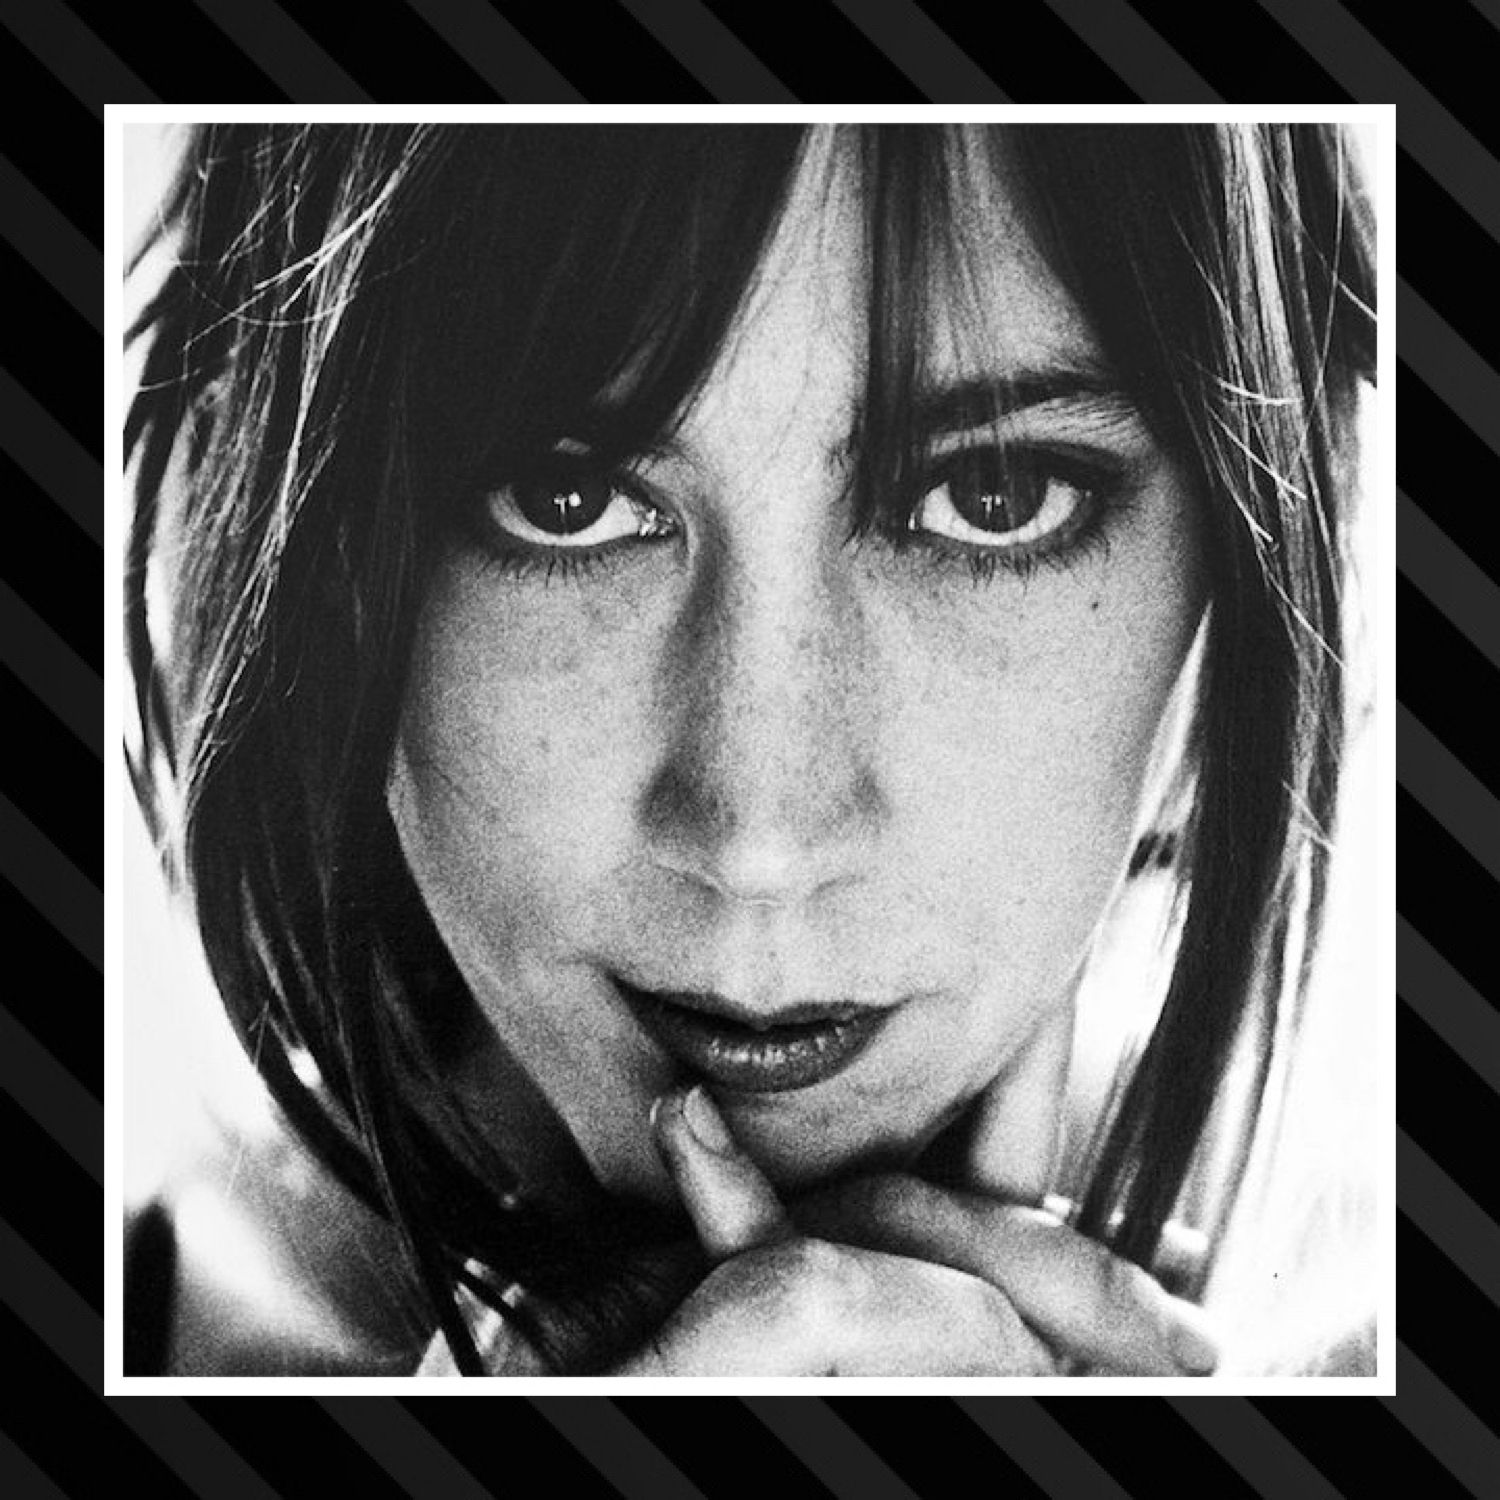 2: The one with Beth Orton